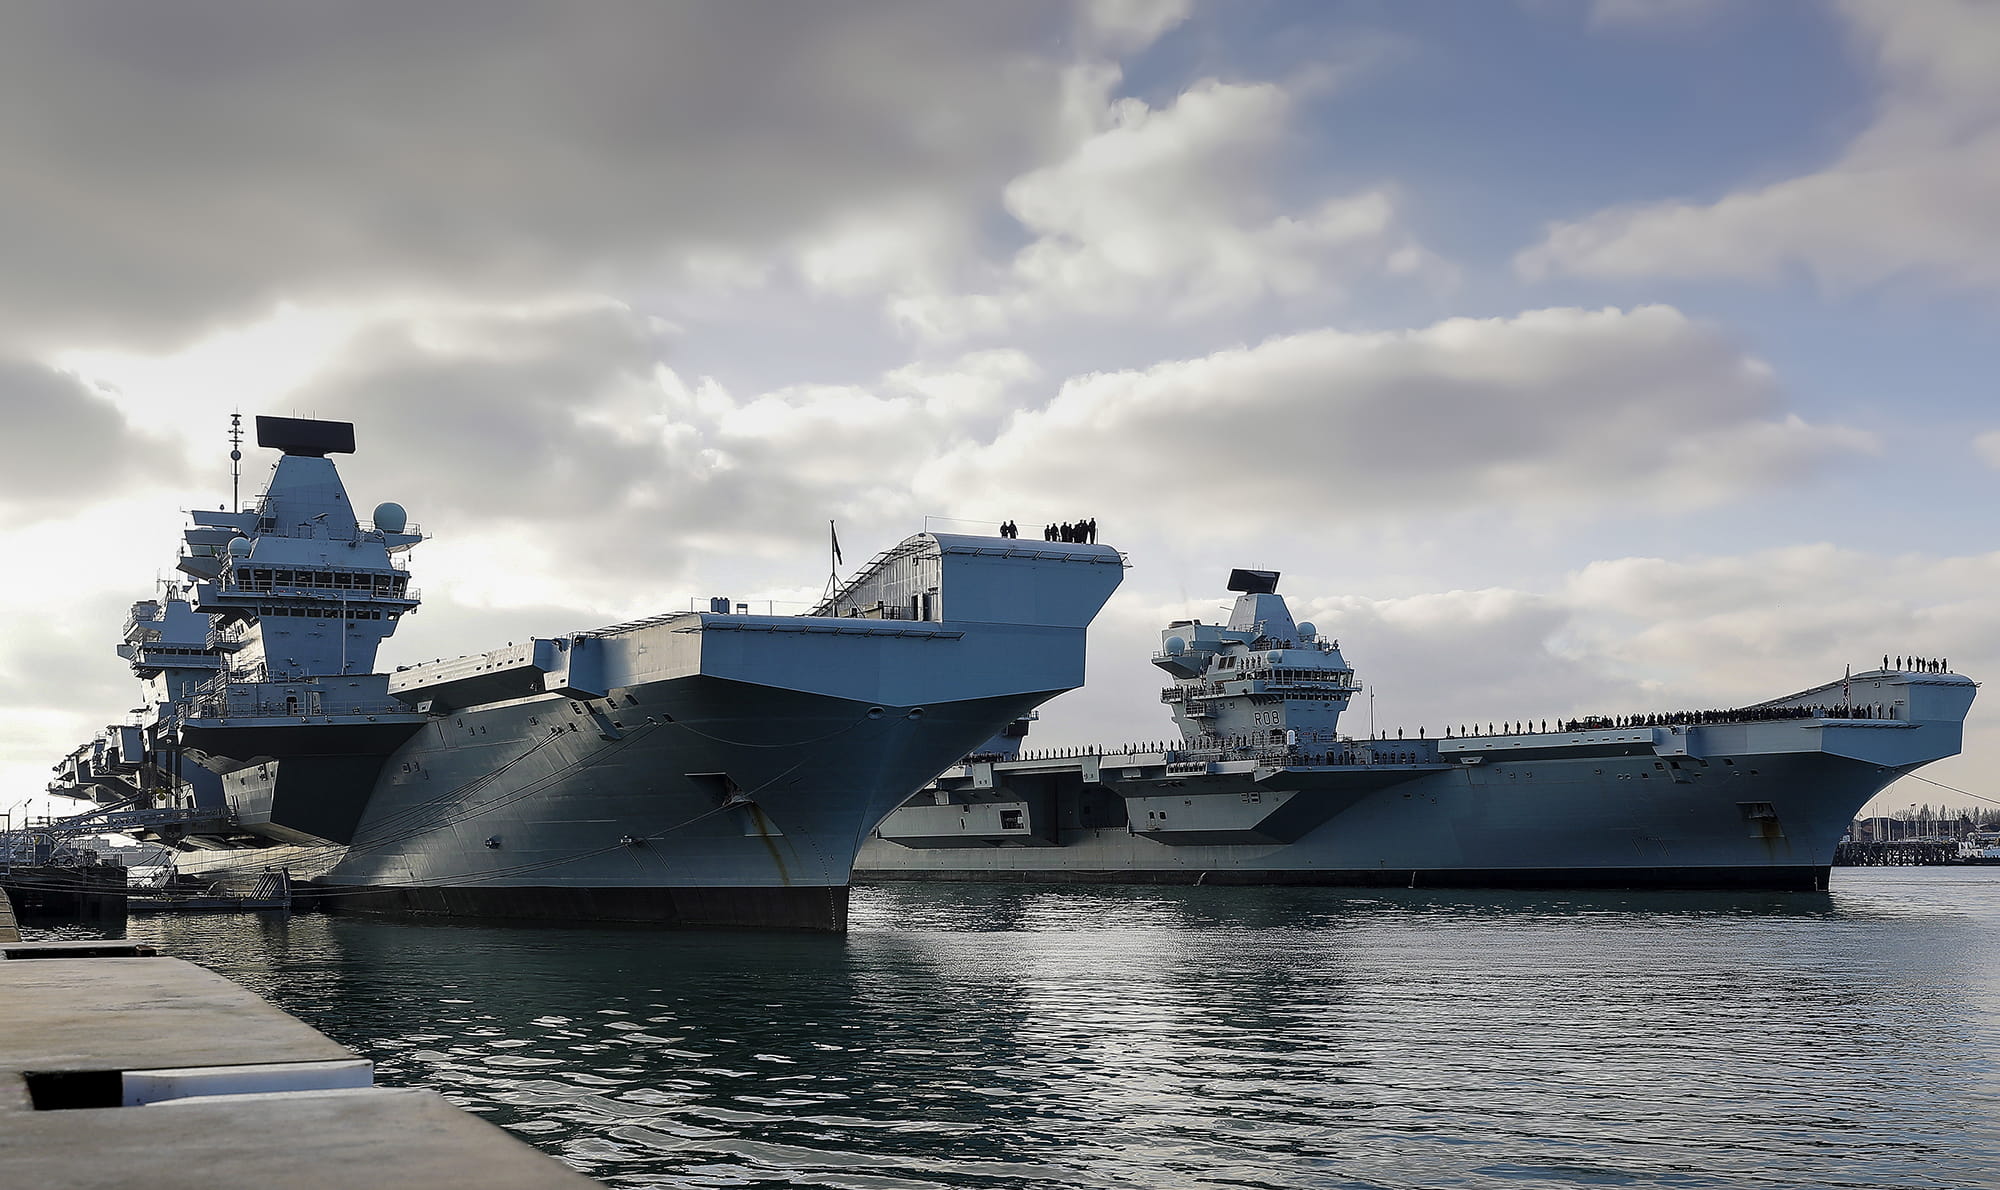 Queen Elizabeth aircraft carrier docked at Portsmouth